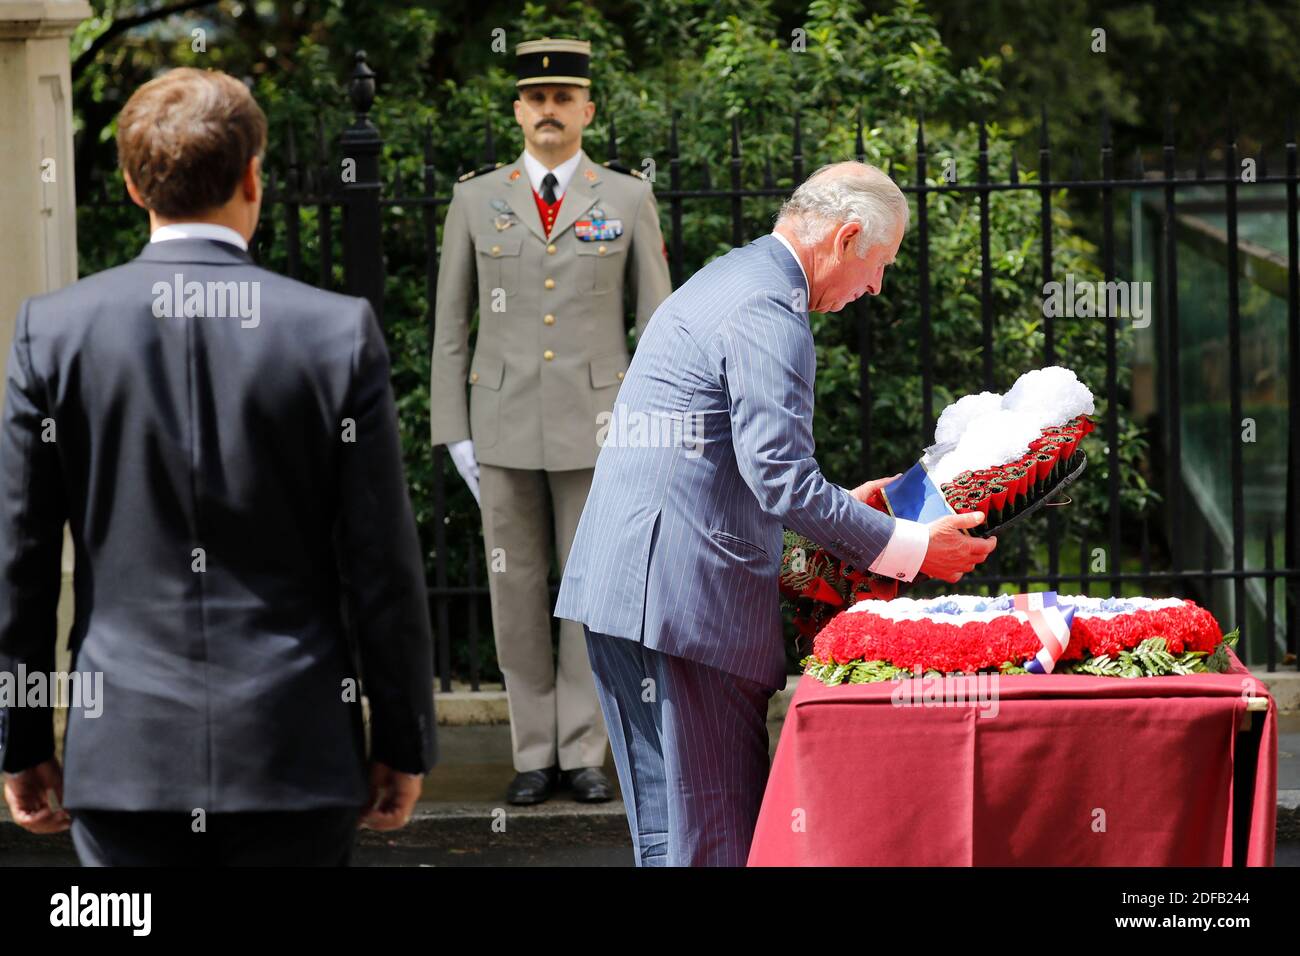 French President Emmanuel Macron (L) looks on as Britain's Prince Charles, Prince of Wales (R) lays a wreath at the statue of former French president Charles de Gaulle at Carlton Gardens in central London on June 18, 2020 during a visit to mark the anniversary of former de Gaulle's appeal to French people to resist the Nazi occupation. - Macron visited London on June 18 to commemorate the 80th anniversary of former French president Charles de Gaulle's appeal to French people to resist the Nazi occupation during World War II. Photo by Tolga AKMEN/Pool/ABACAPRESS.COM Stock Photo